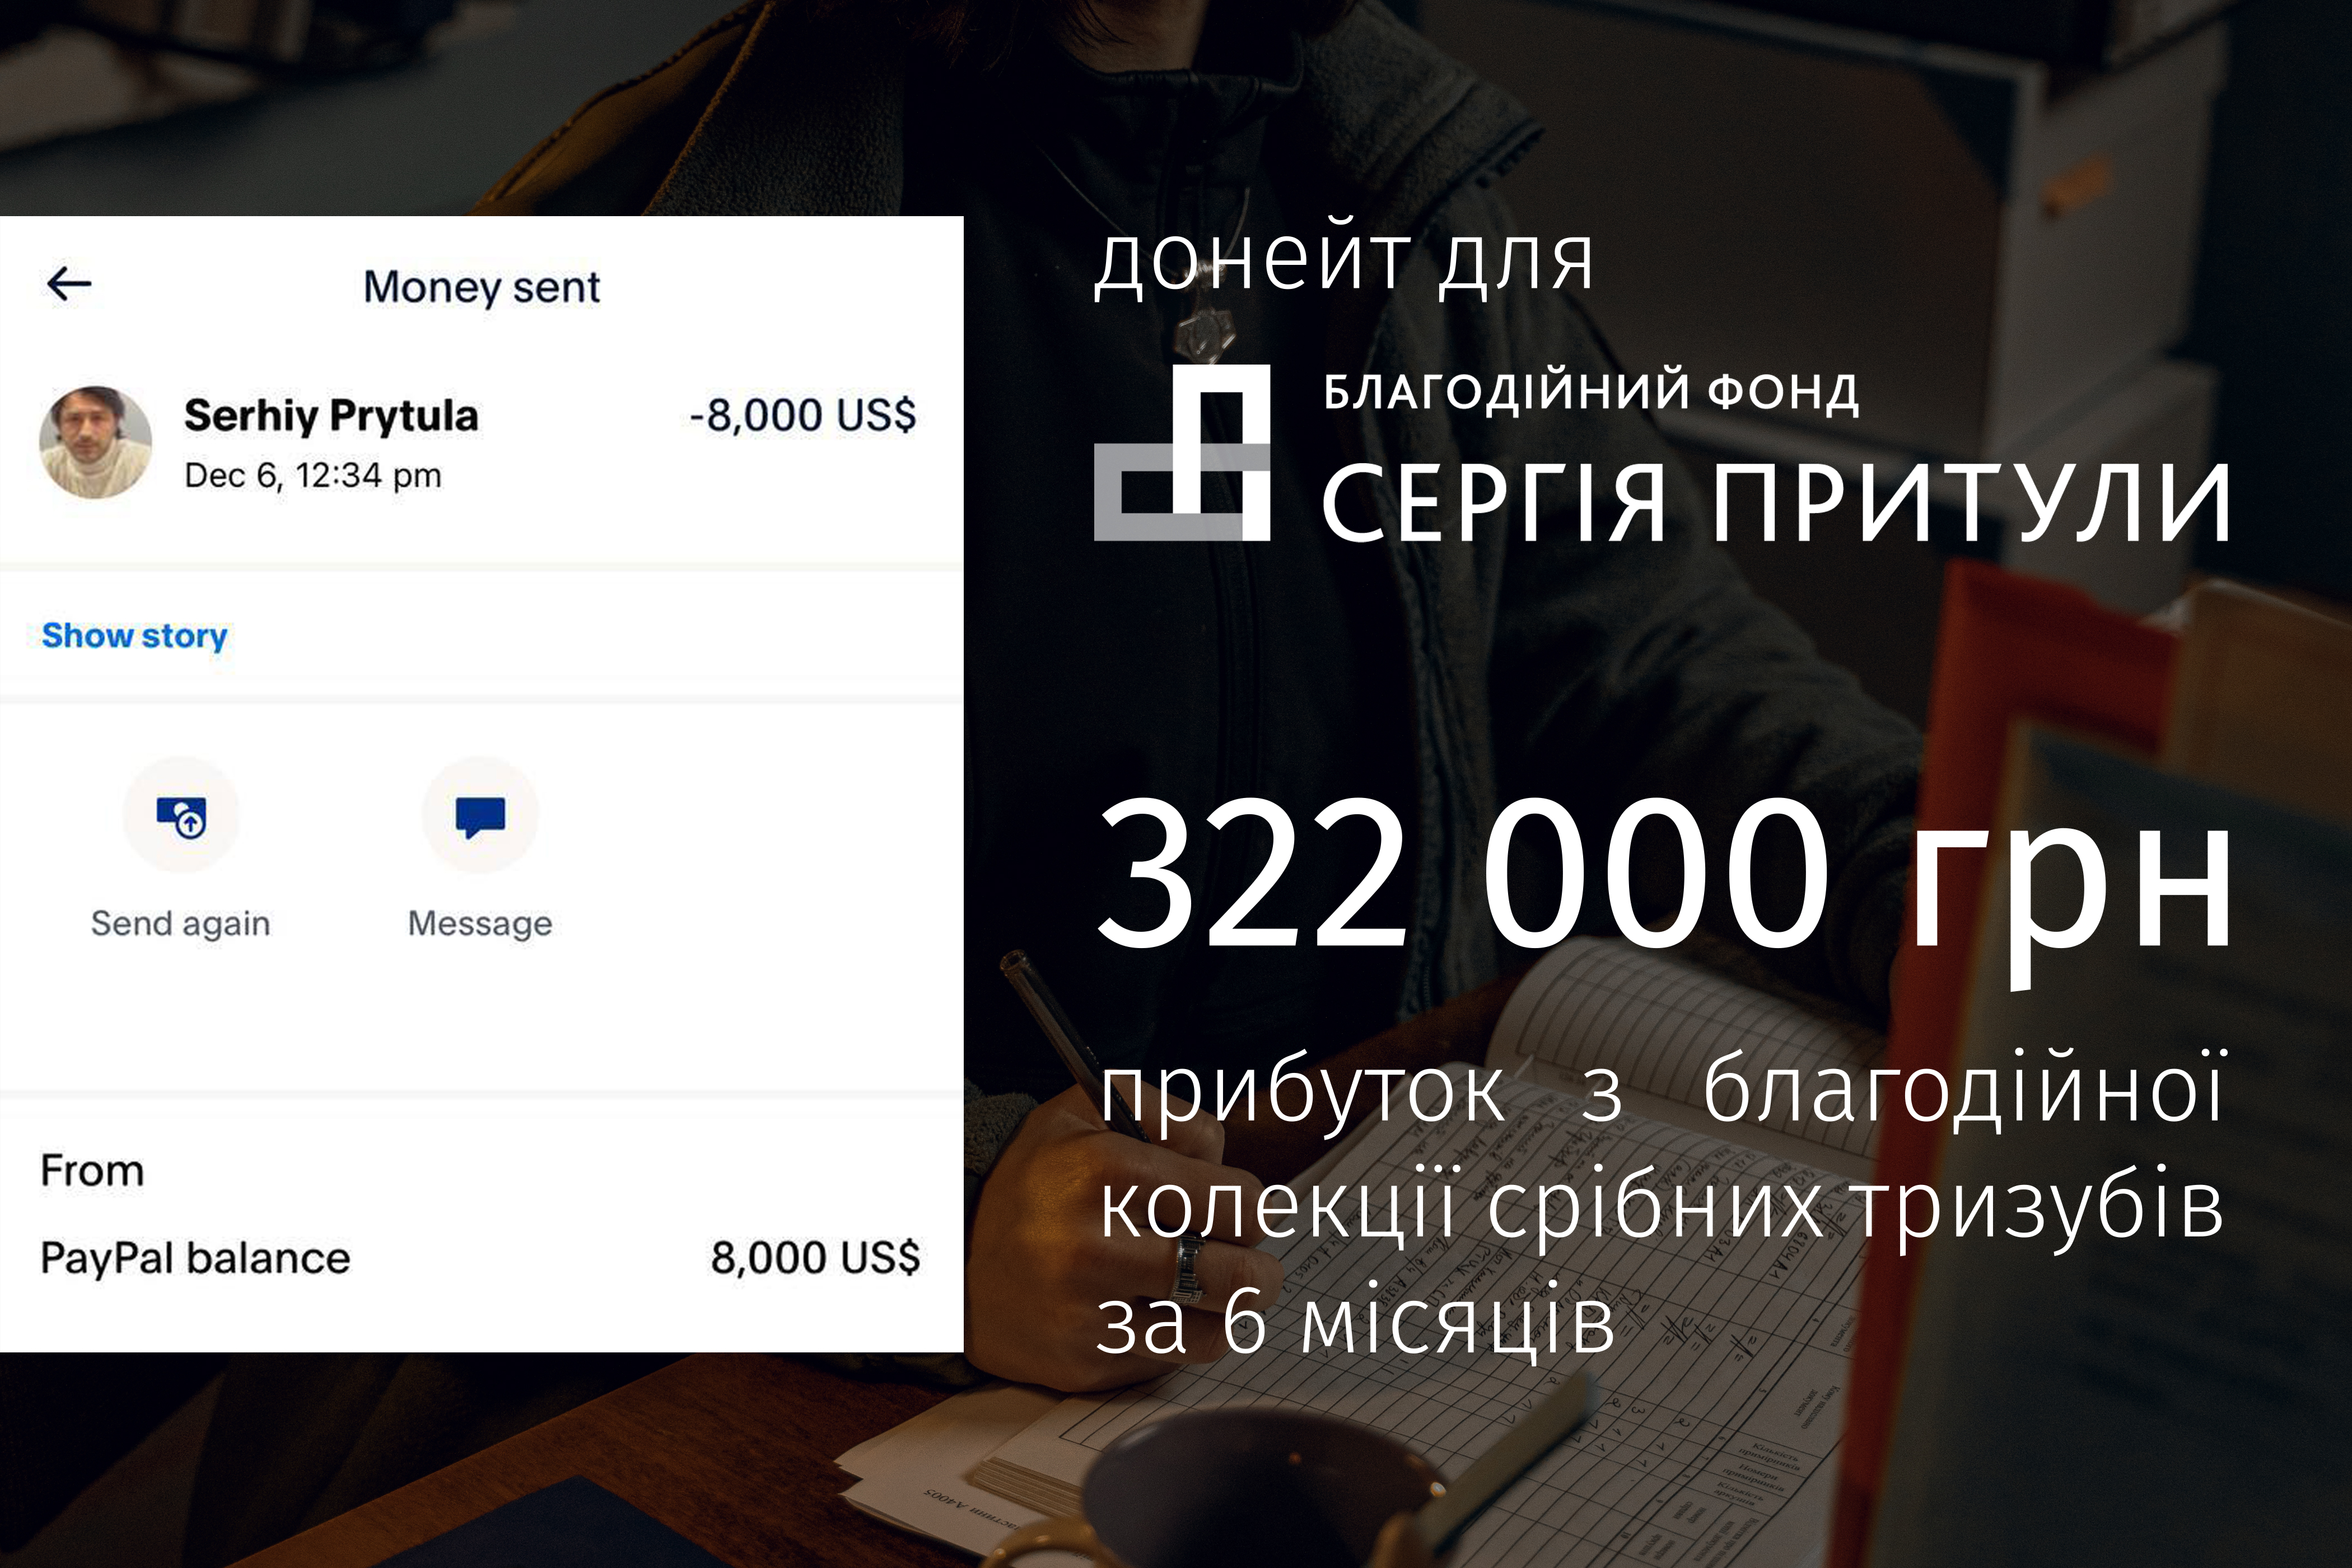 Report on the donation to the Serhiy Prytula Foundation